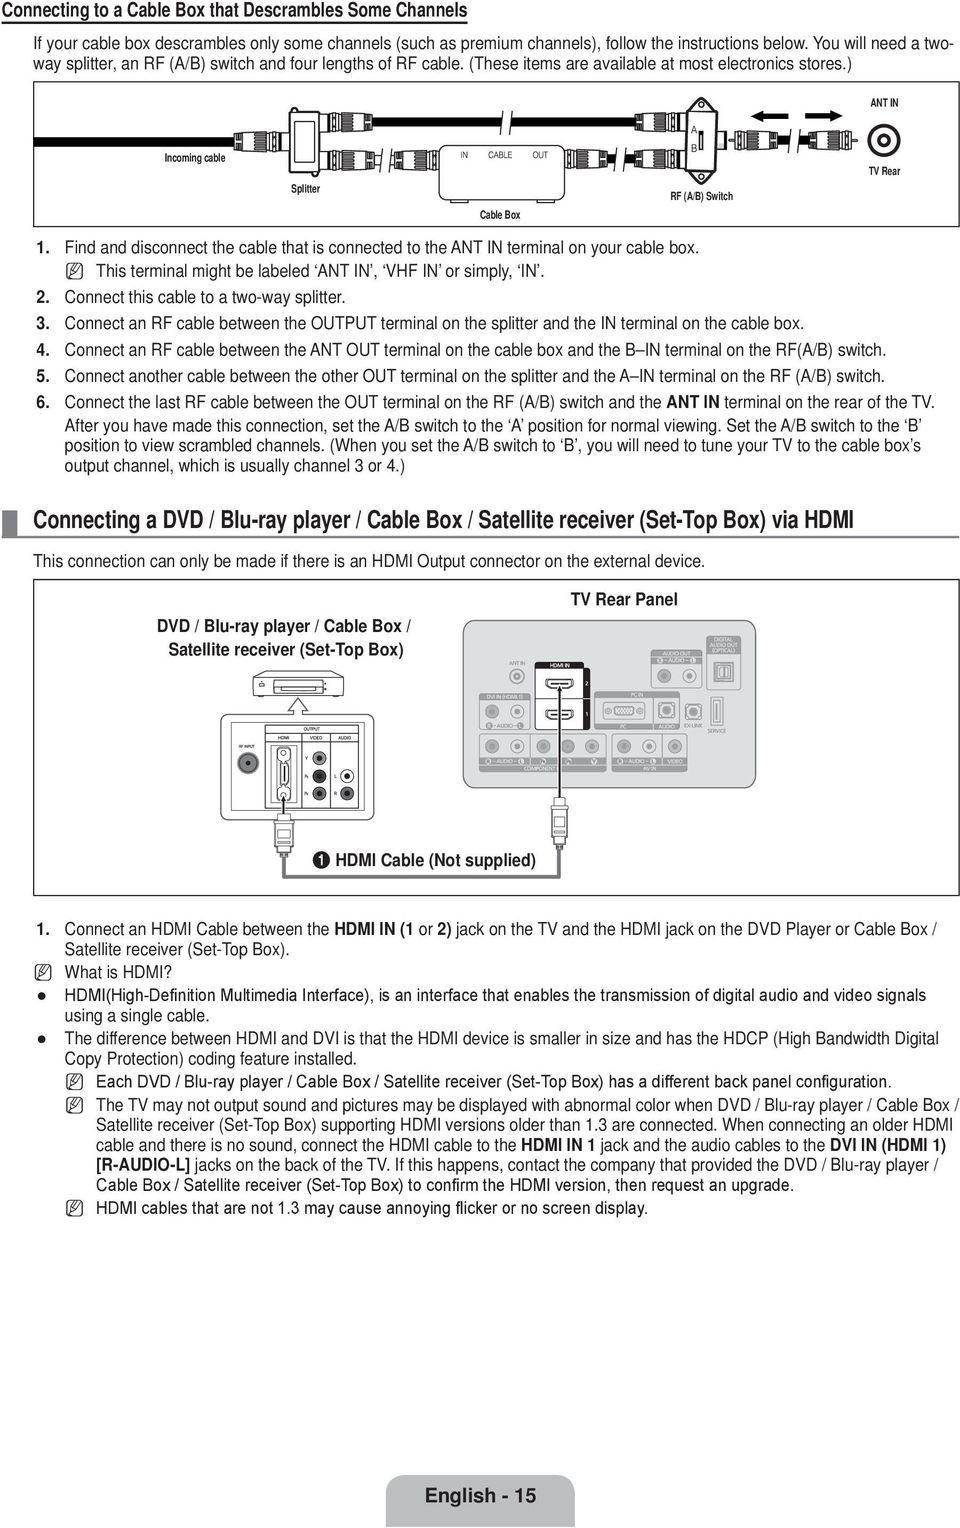 ) AT I Incoming cable Splitter Cable Box RF (A/B) Switch TV Rear 1. Find and disconnect the cable that is connected to the AT I terminal on your cable box.